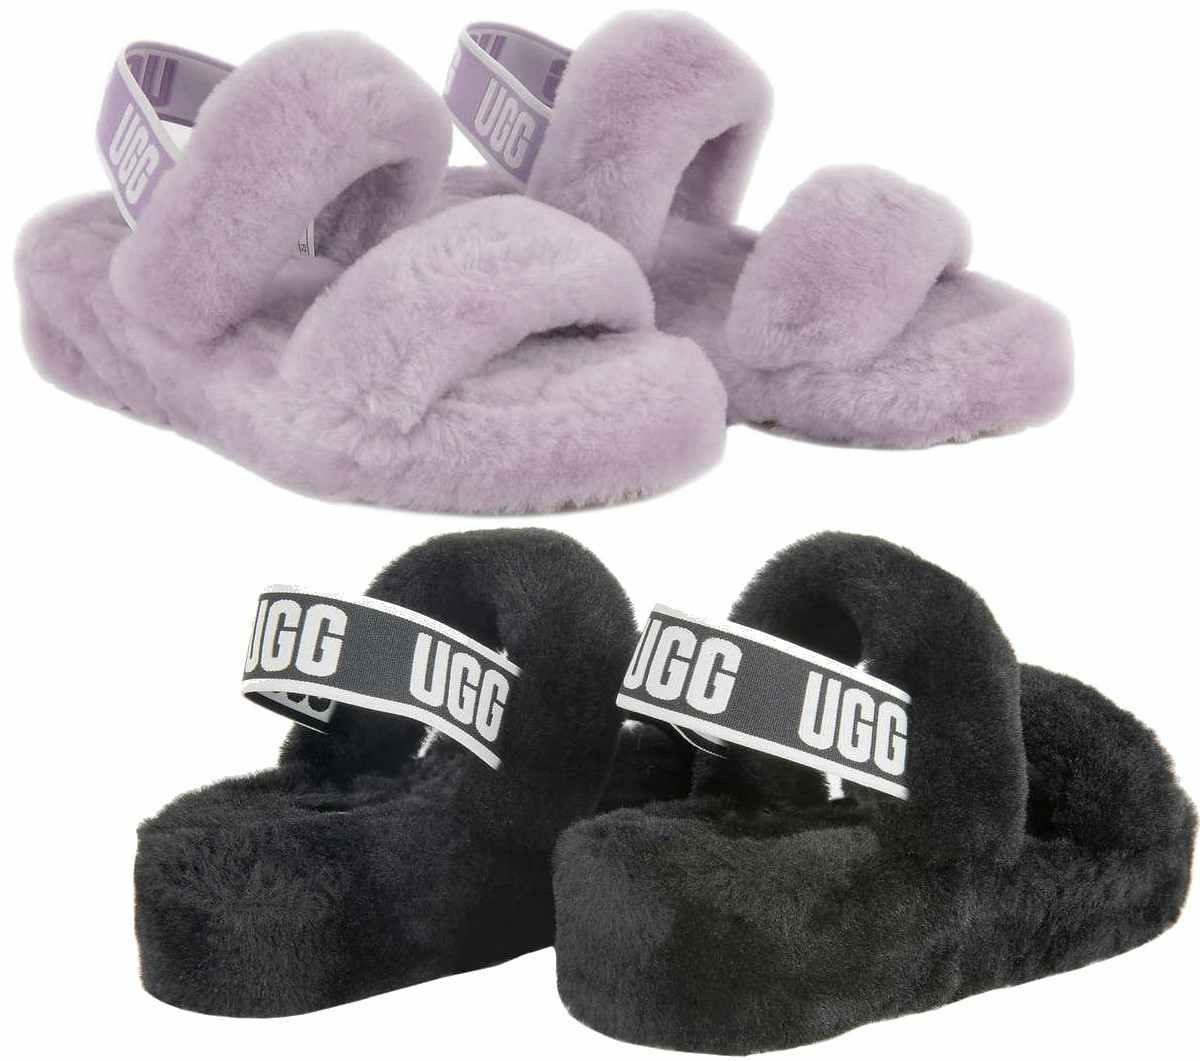 costco-ugg-slides-slippers-010722-a